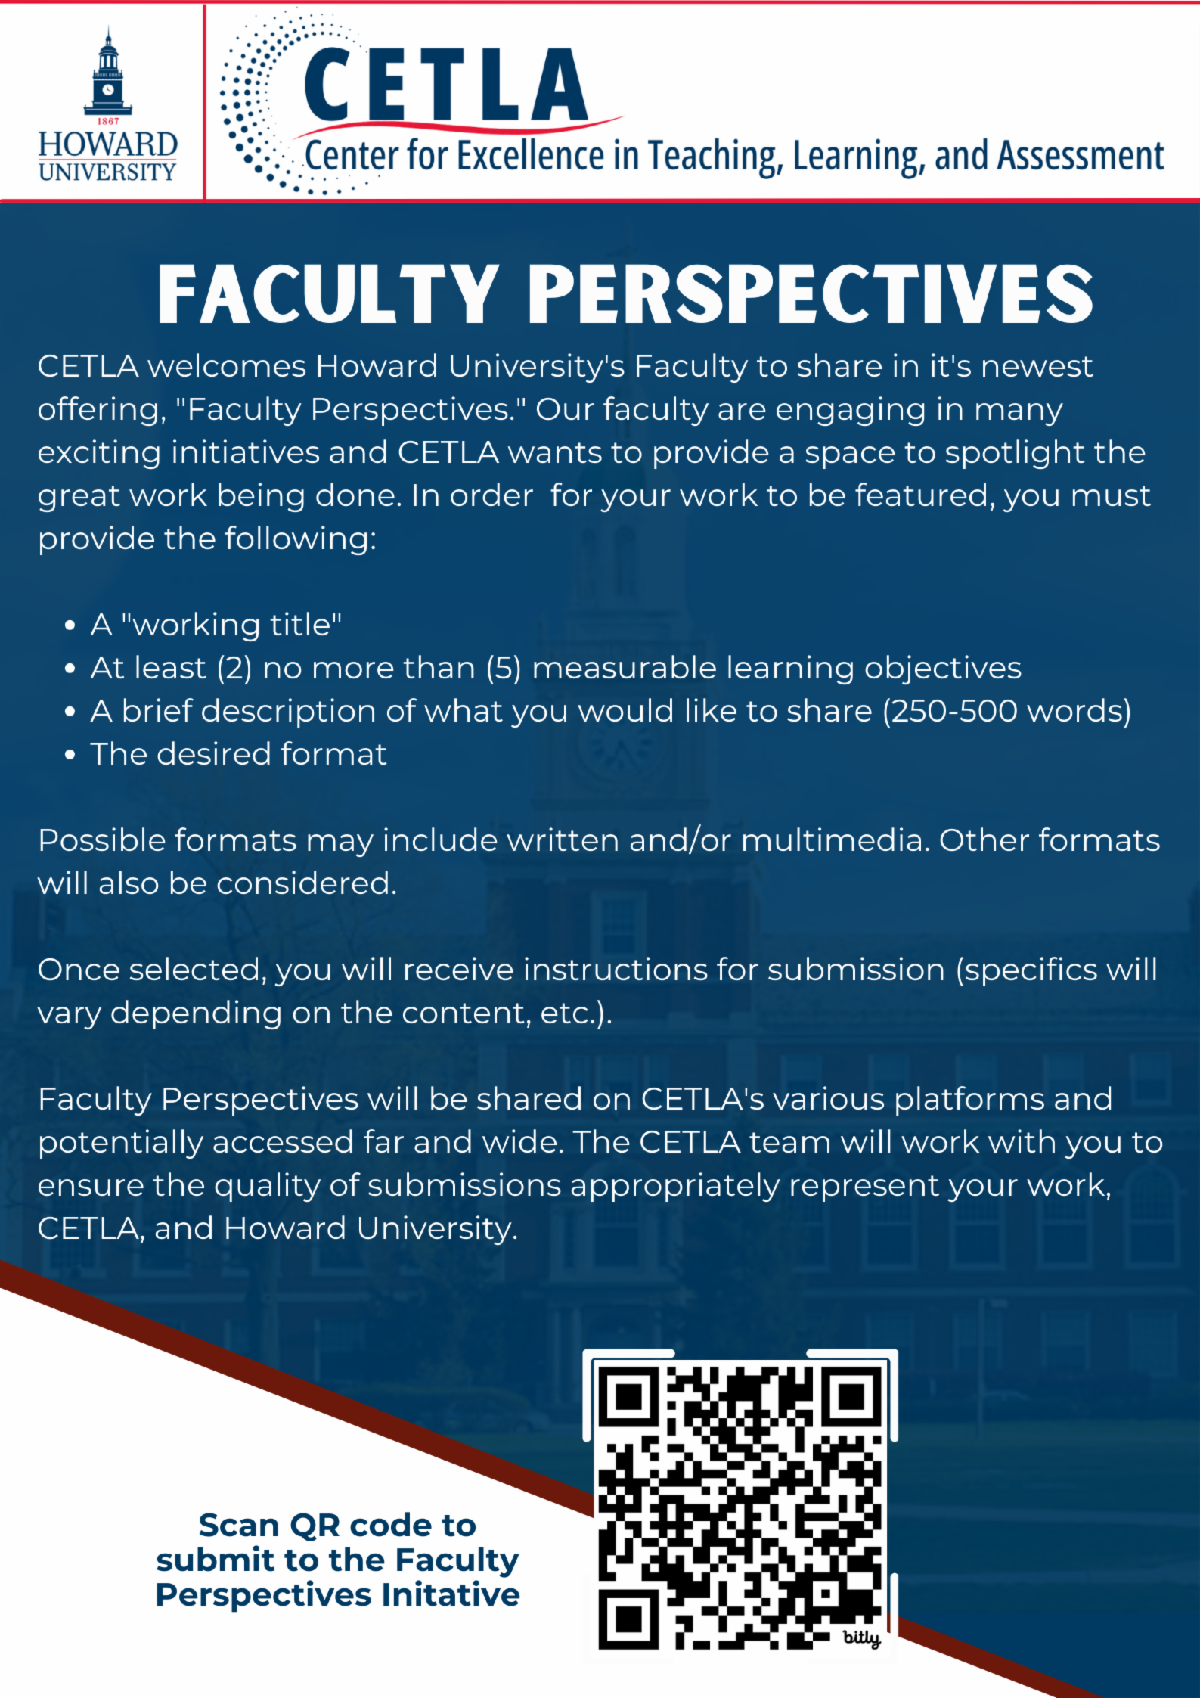 Image of Faculty Perspectives flyer